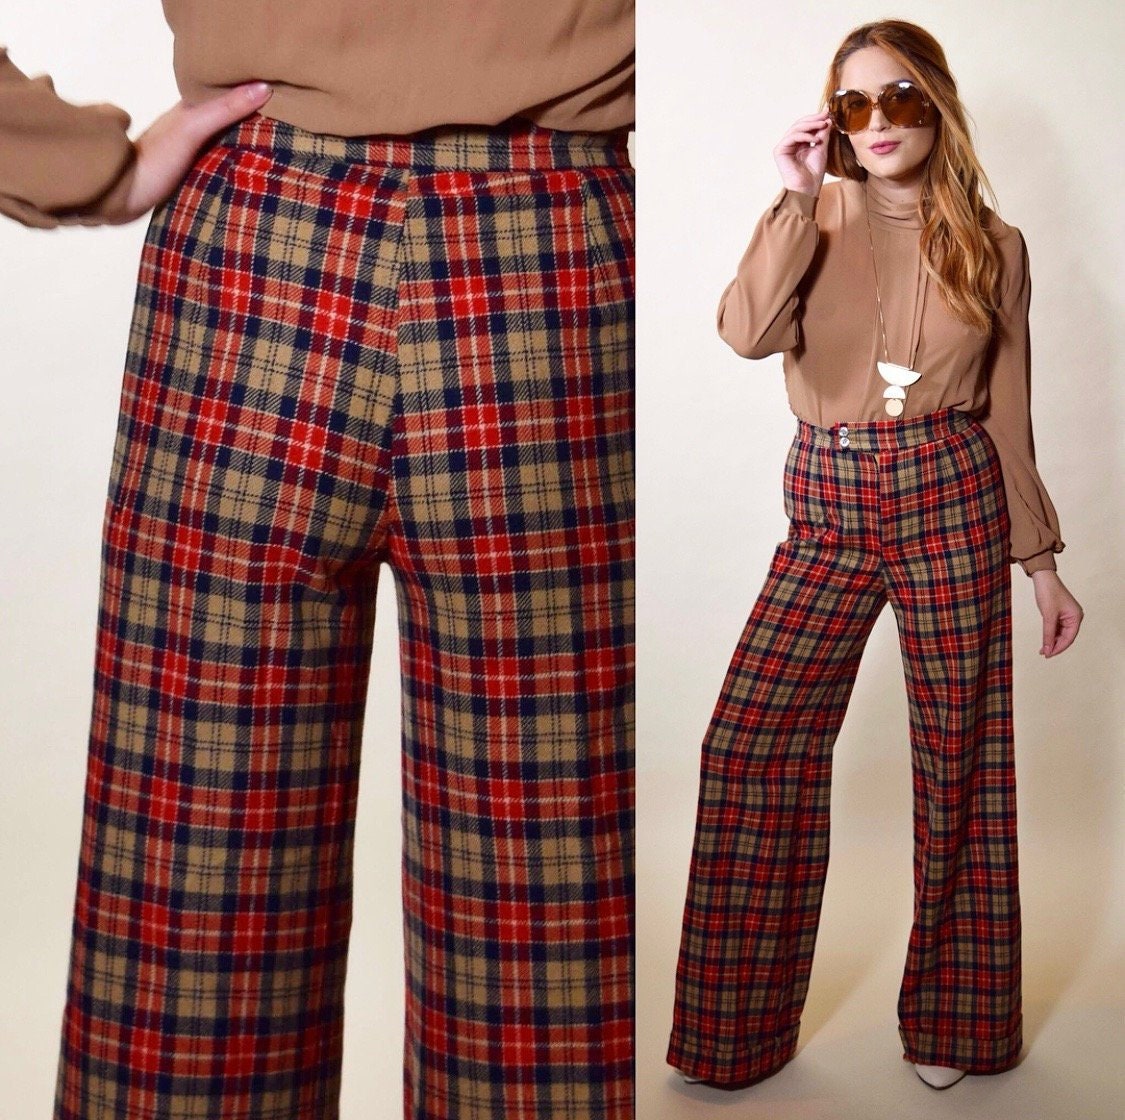 1970s authentic vintage wool plaid bell bottom high waisted pants women's  size S-M ( 28 Waist )